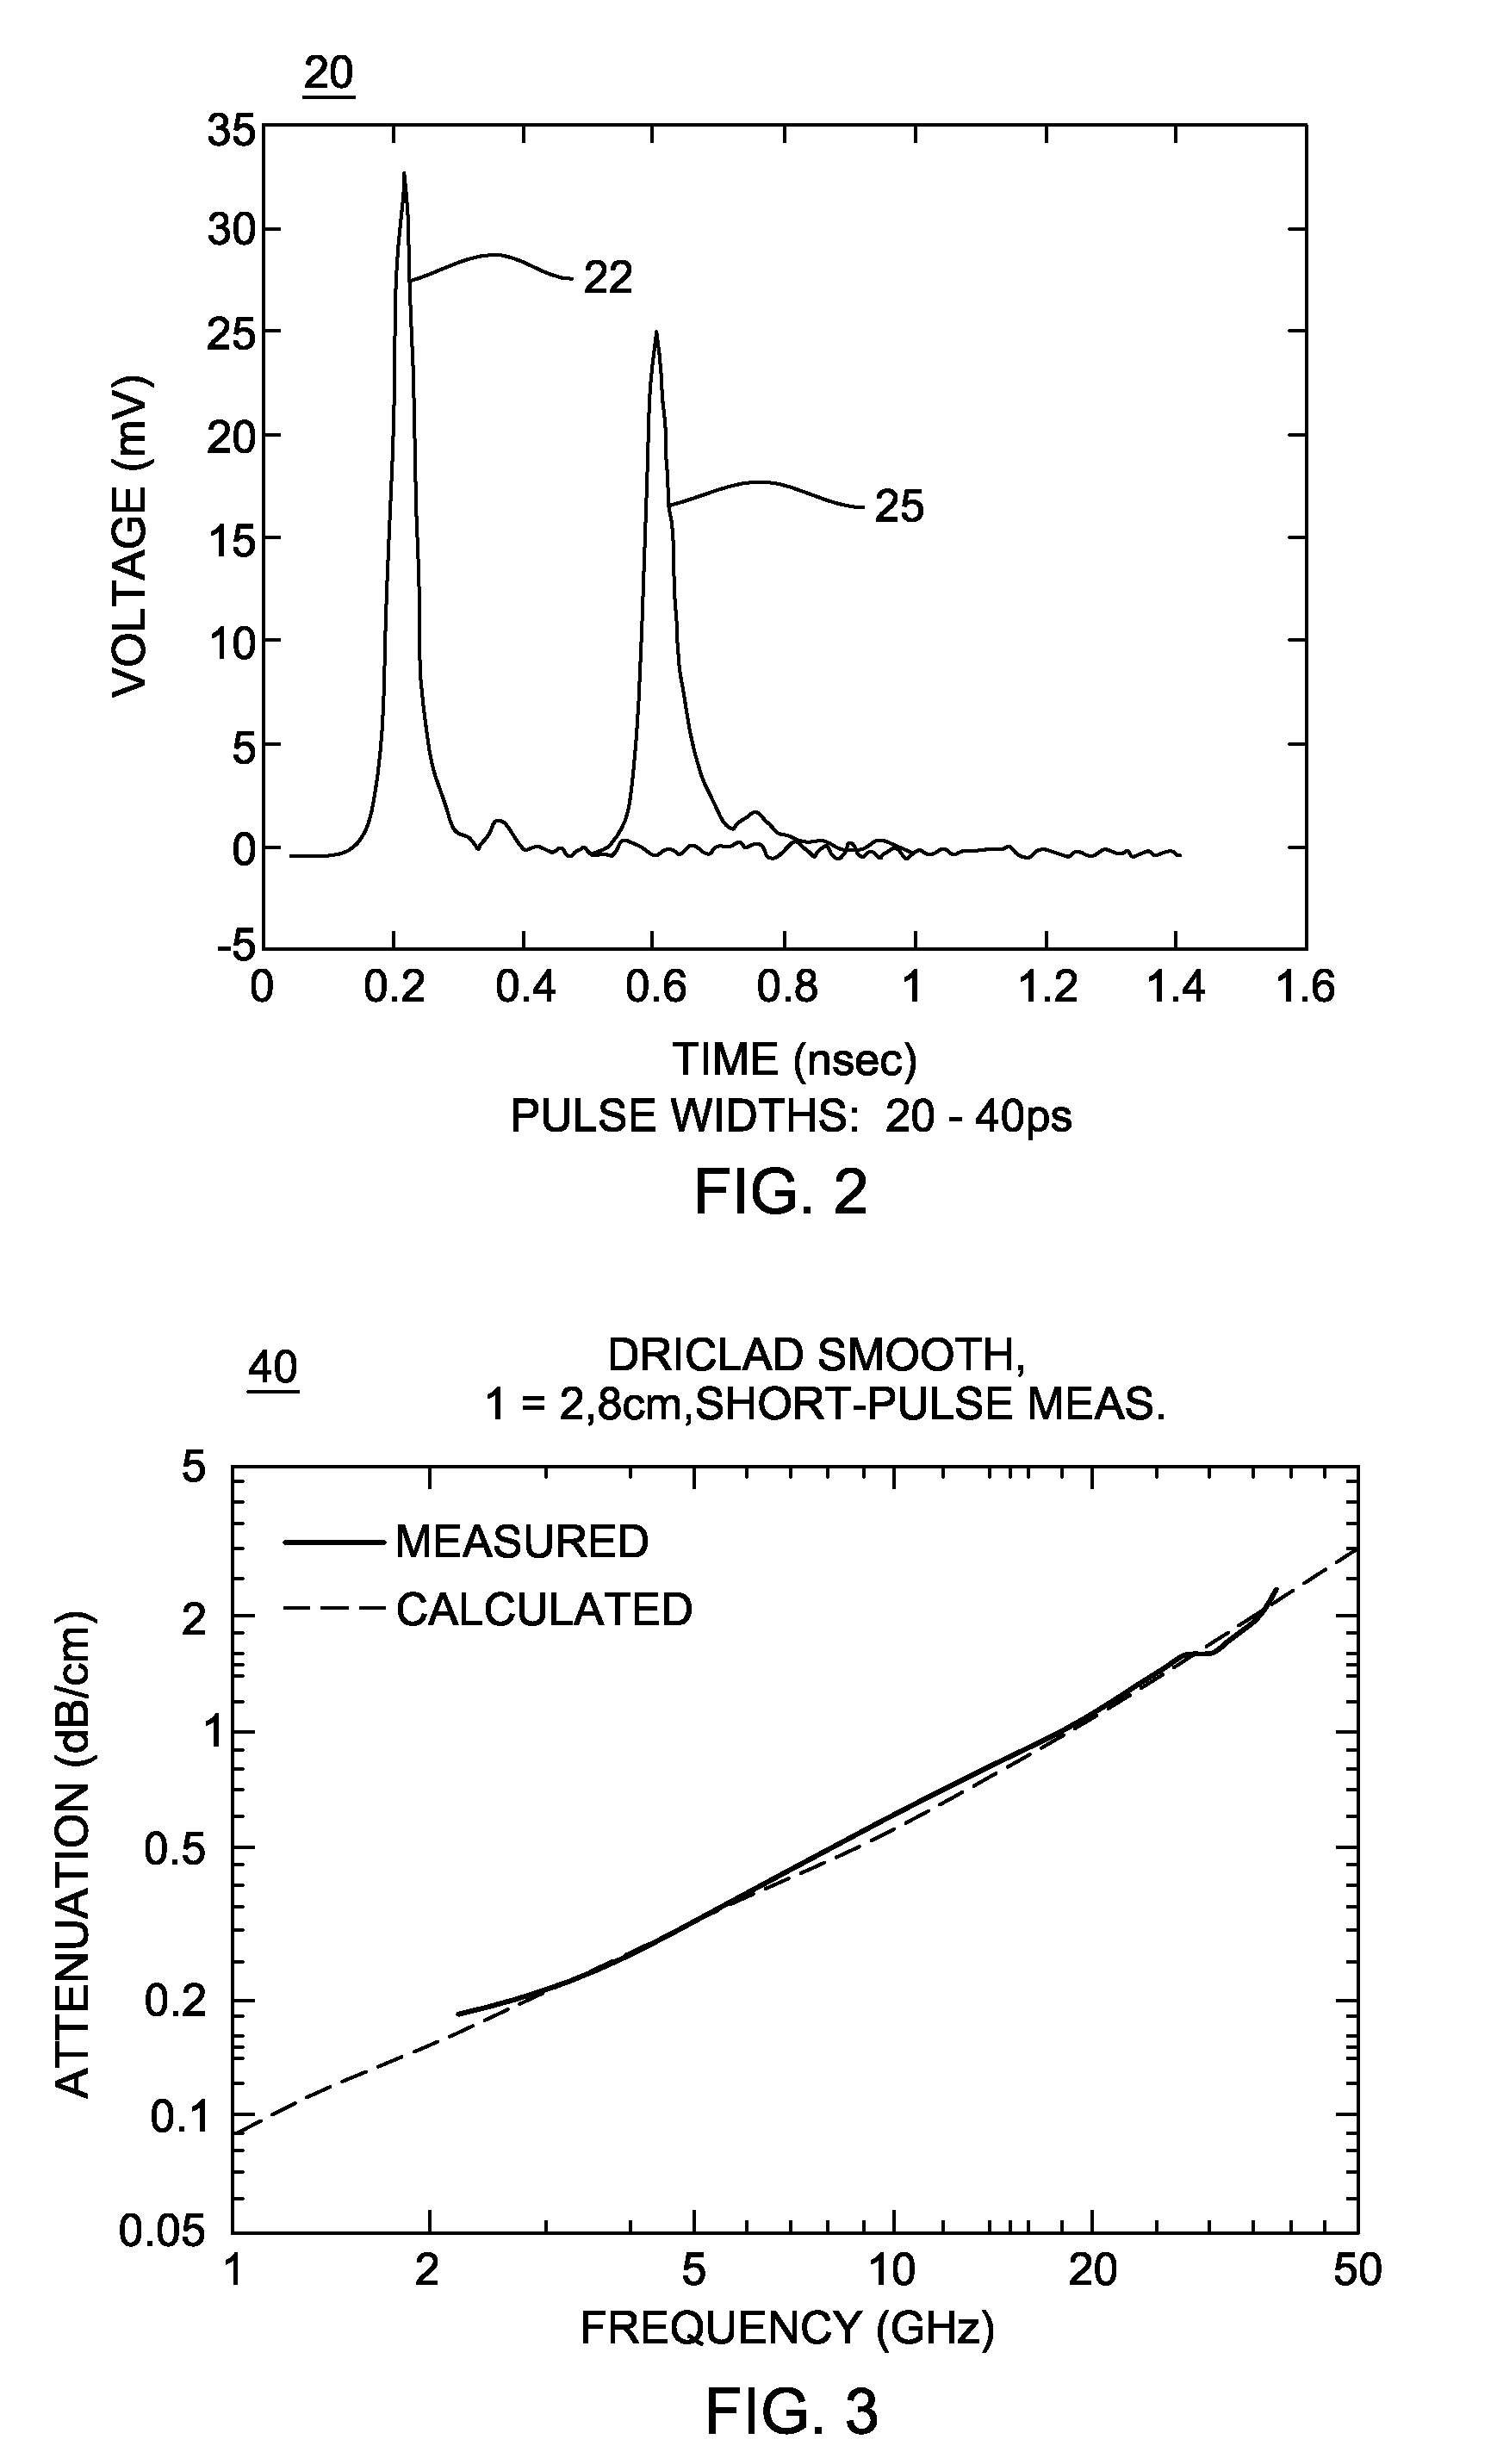 System and method implementing short-pulse propagation technique on production-level boards with incremental accuracy and productivity levels